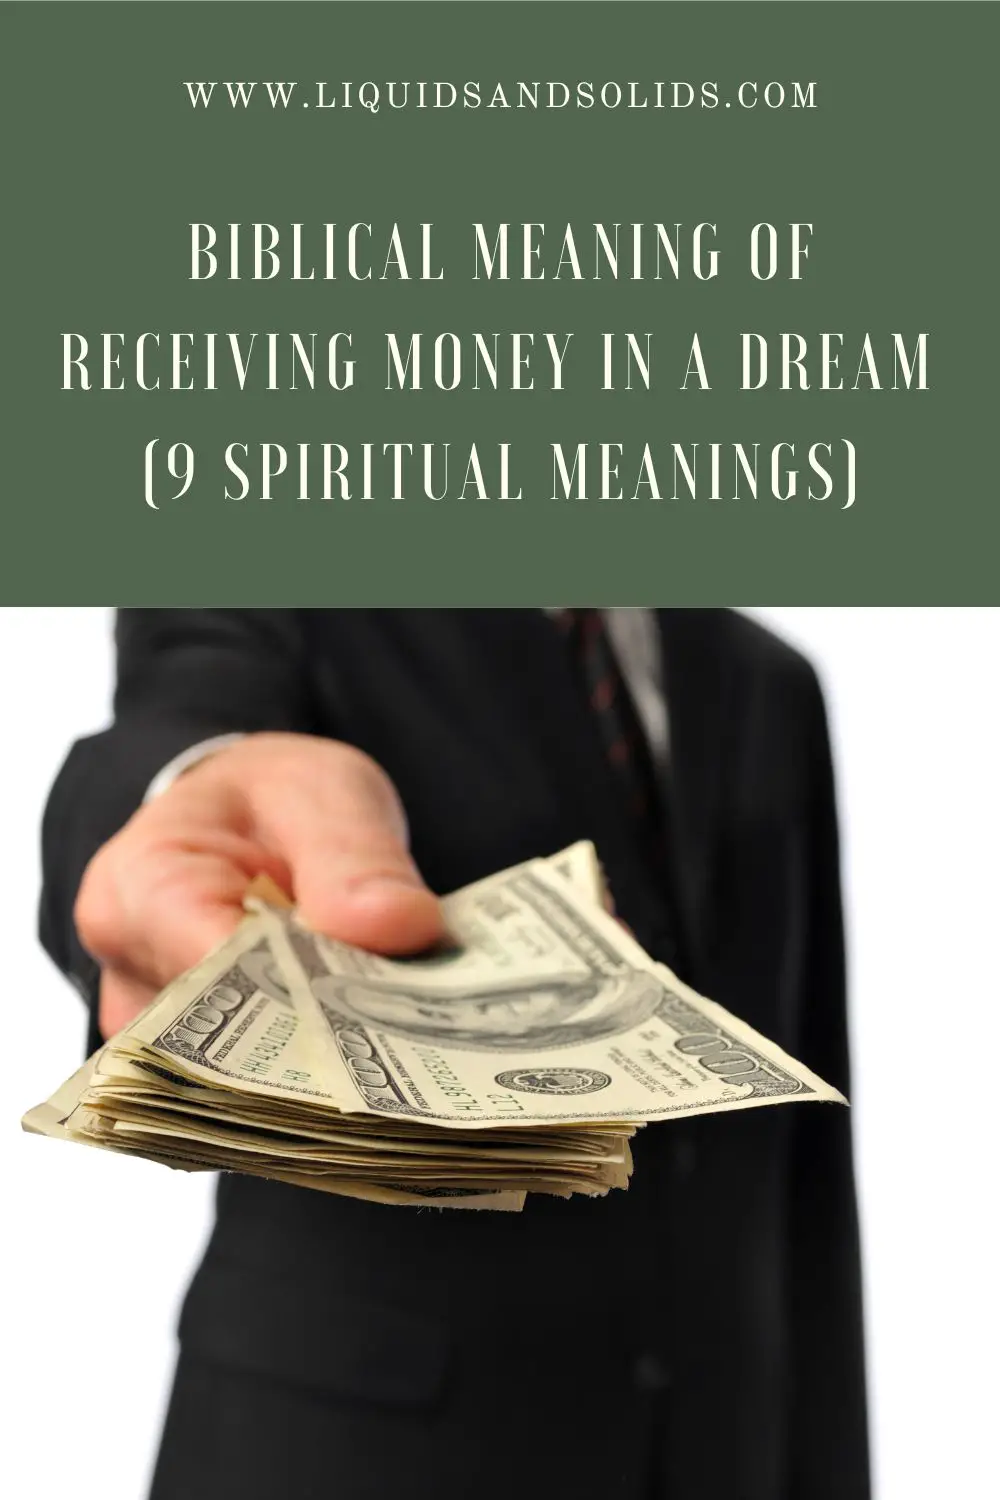 What Other Symbols Connected To Money In Dreams?